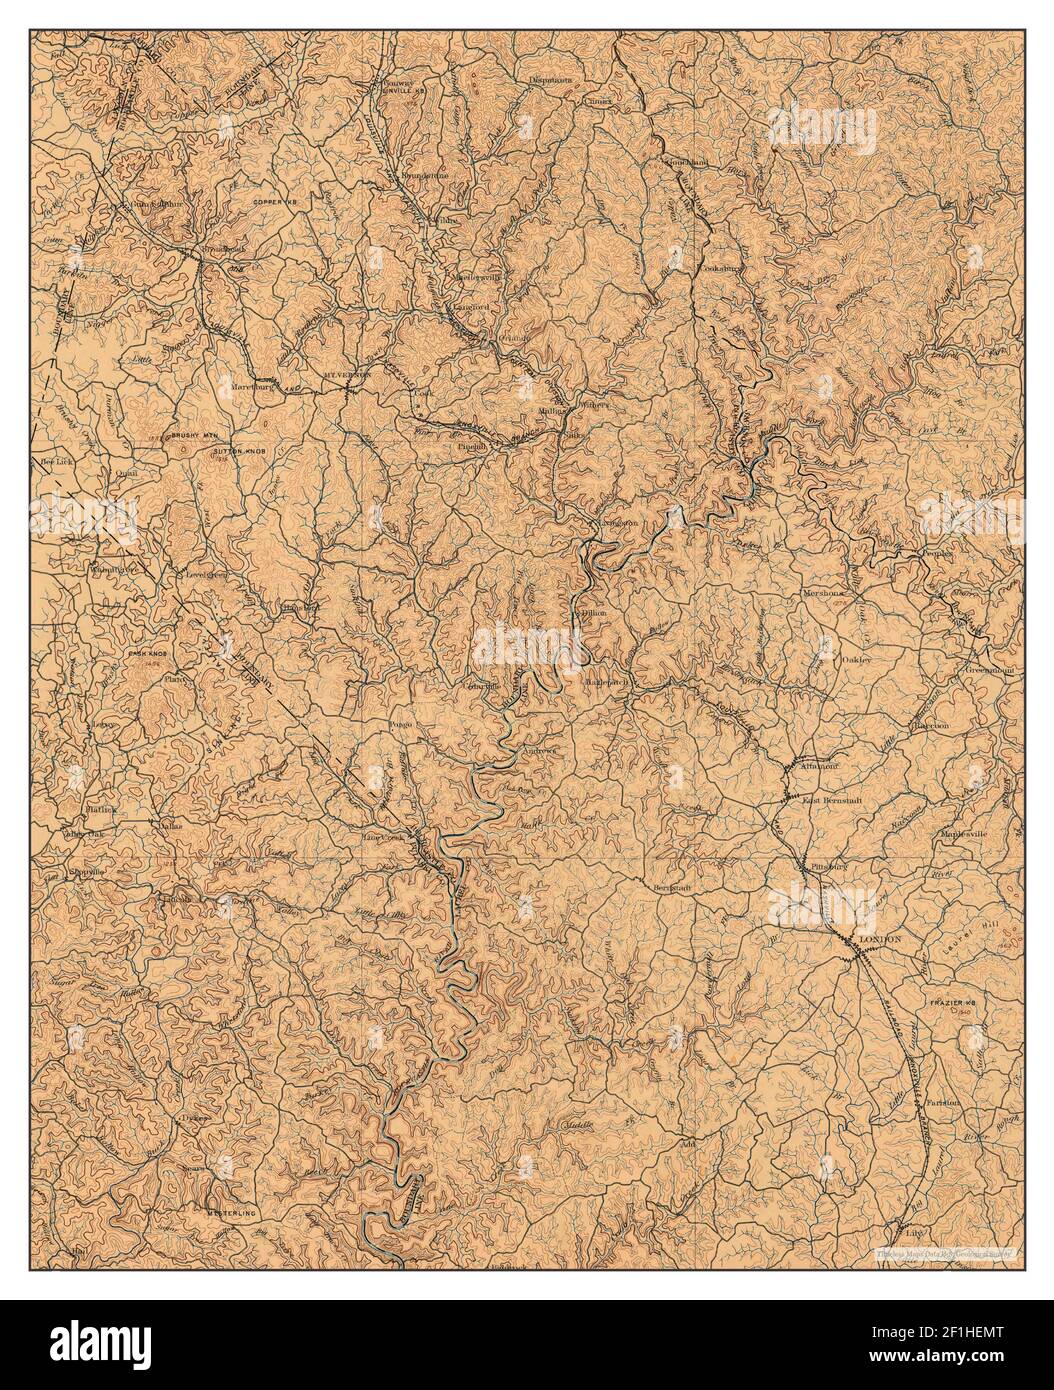 London, Kentucky, map 1897, 1:125000, United States of America by Timeless Maps, data U.S. Geological Survey Stock Photo